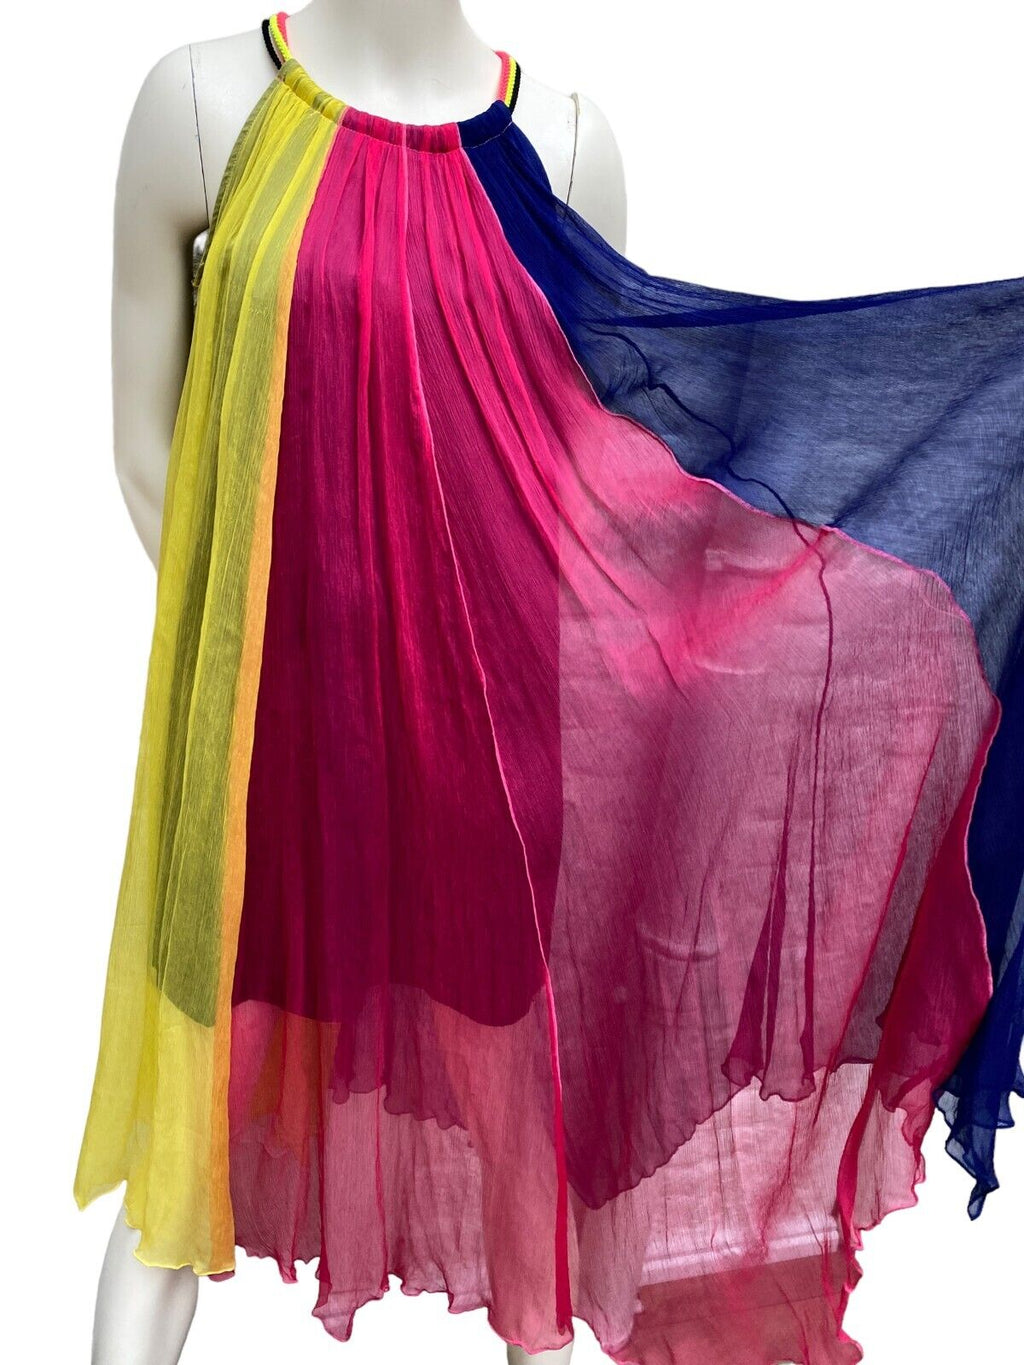 Smooth Silk Sleeveless Colorful Maxi Dress Primary colors  S